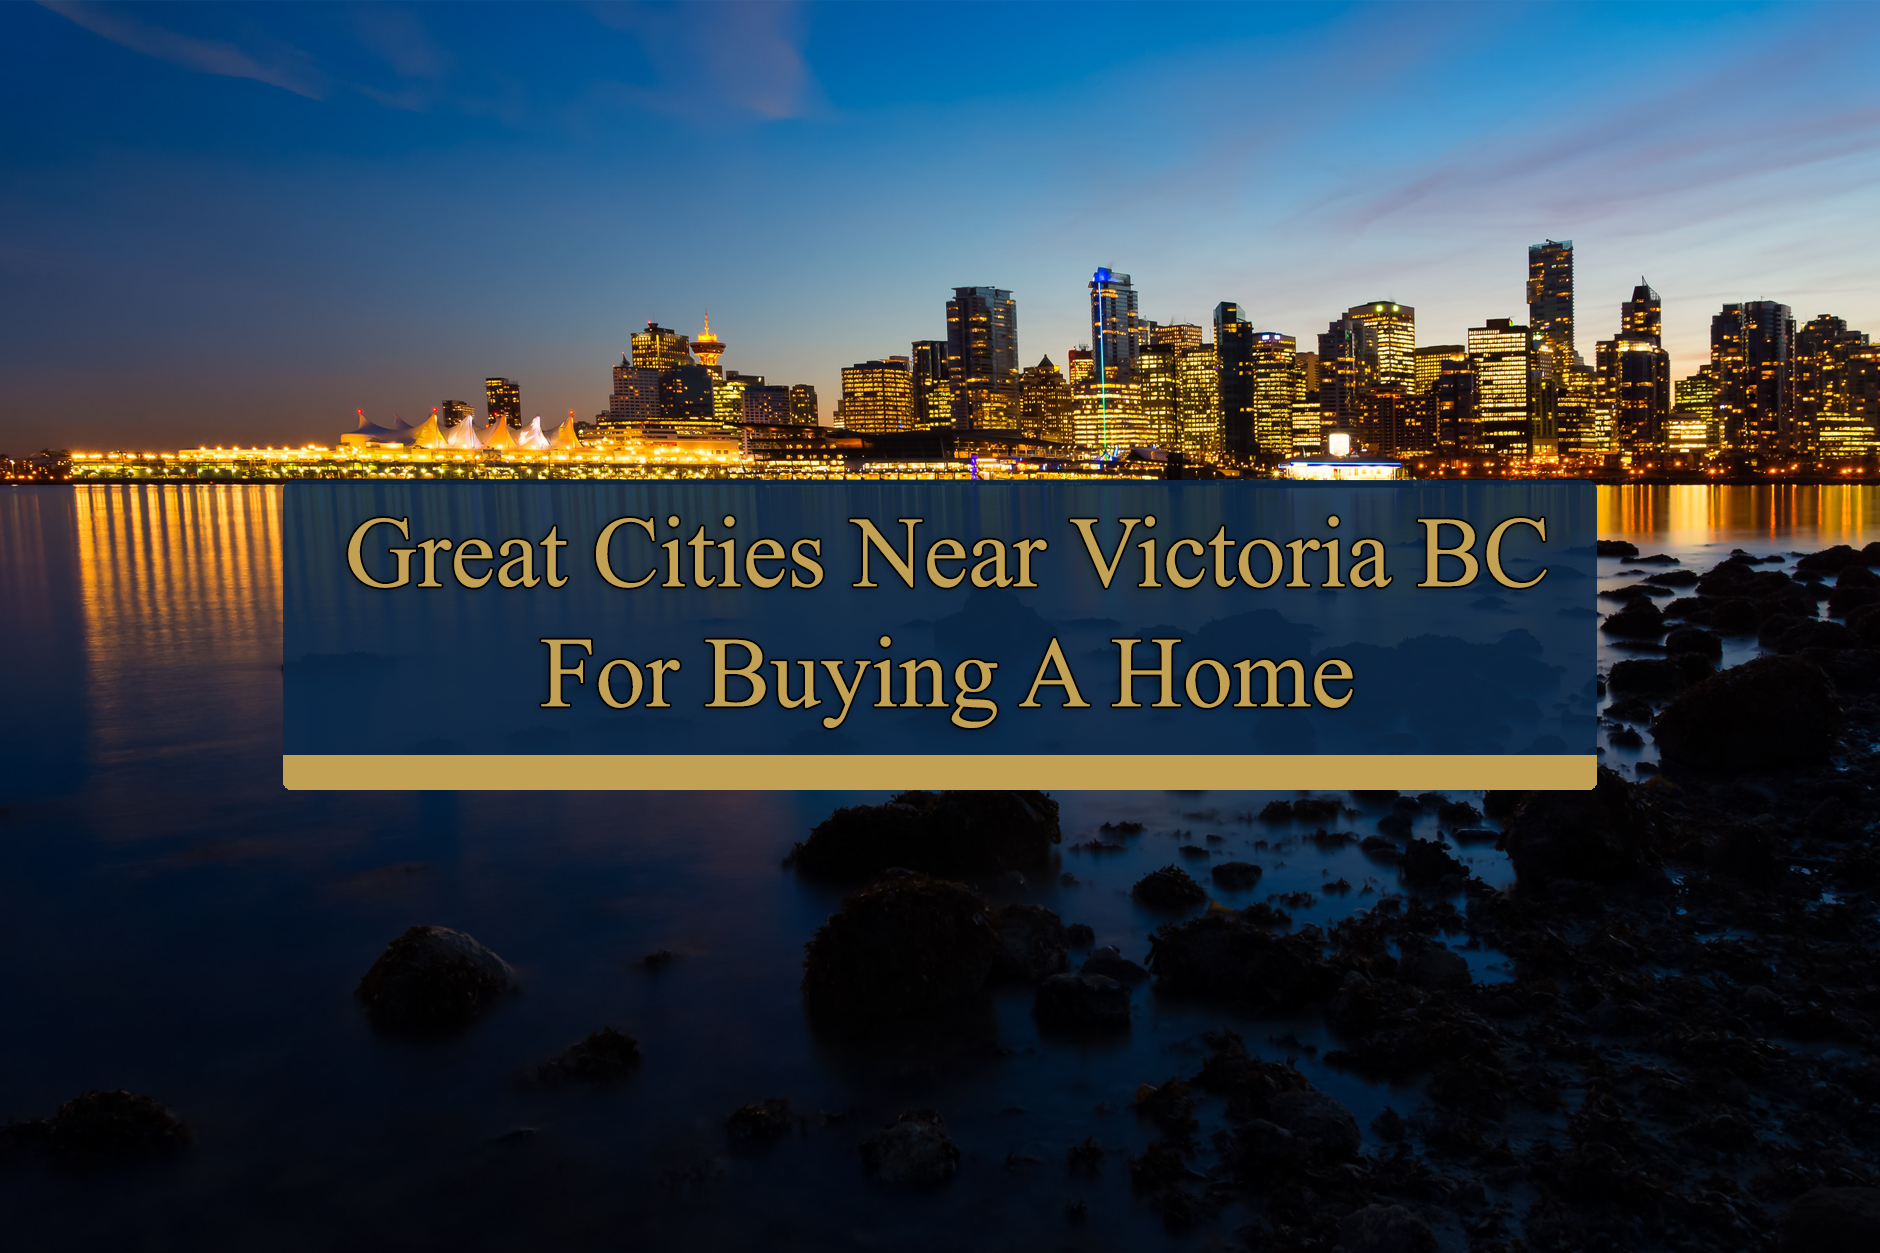 Great Cities Near Victoria BC for Buying a Home